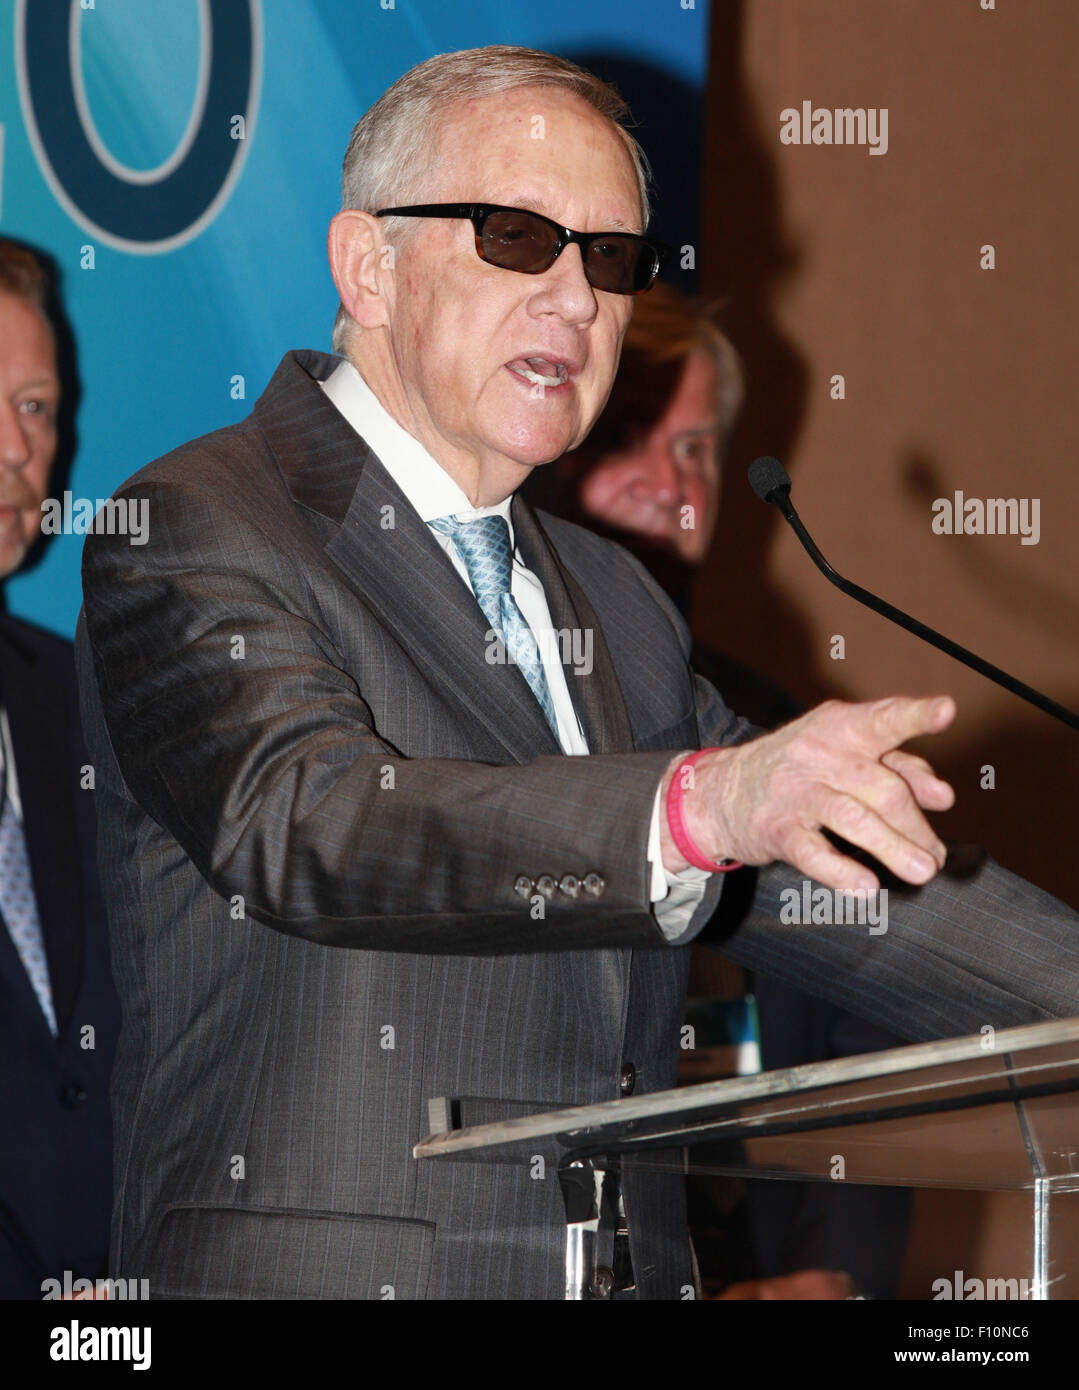 Aug. 24, 2015 - Las Vegas, Nevada, United States of America - Senator Harry Reid (D, NV) speaks at  Valley ElectriC Association press conference  during the 2015 National Clean Energy Summit 8.0 on August 24, 2015  at Mandalay Bay Convention Center in Las Vegas, Nevada. (Credit Image: © Marcel Thomas via ZUMA Wire) Stock Photo